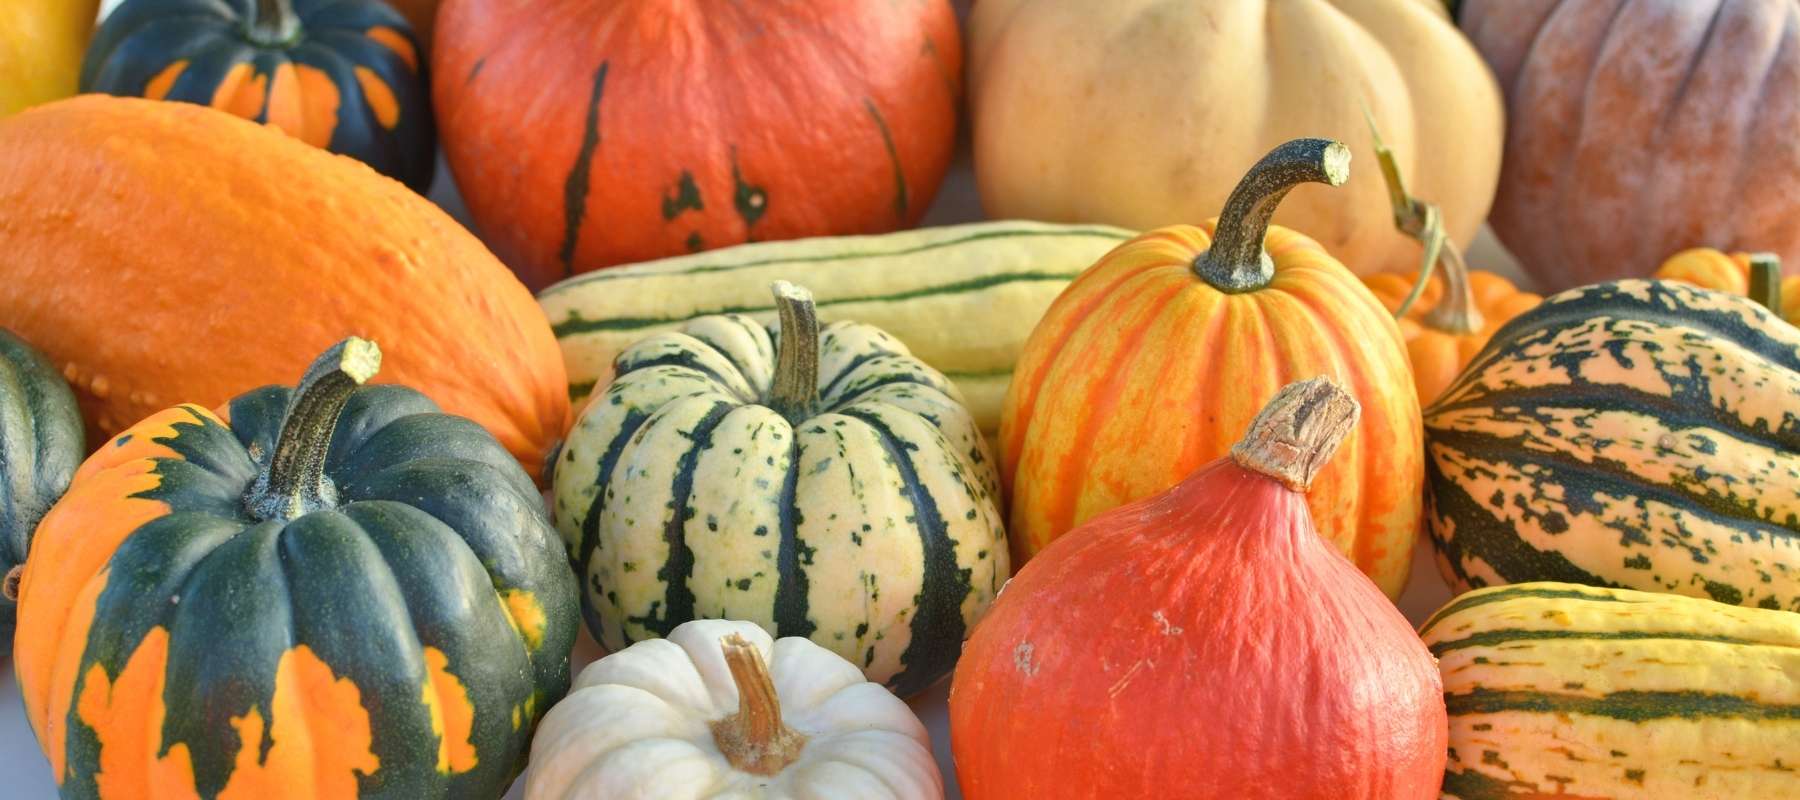 How to Cure and Store Winter Squash